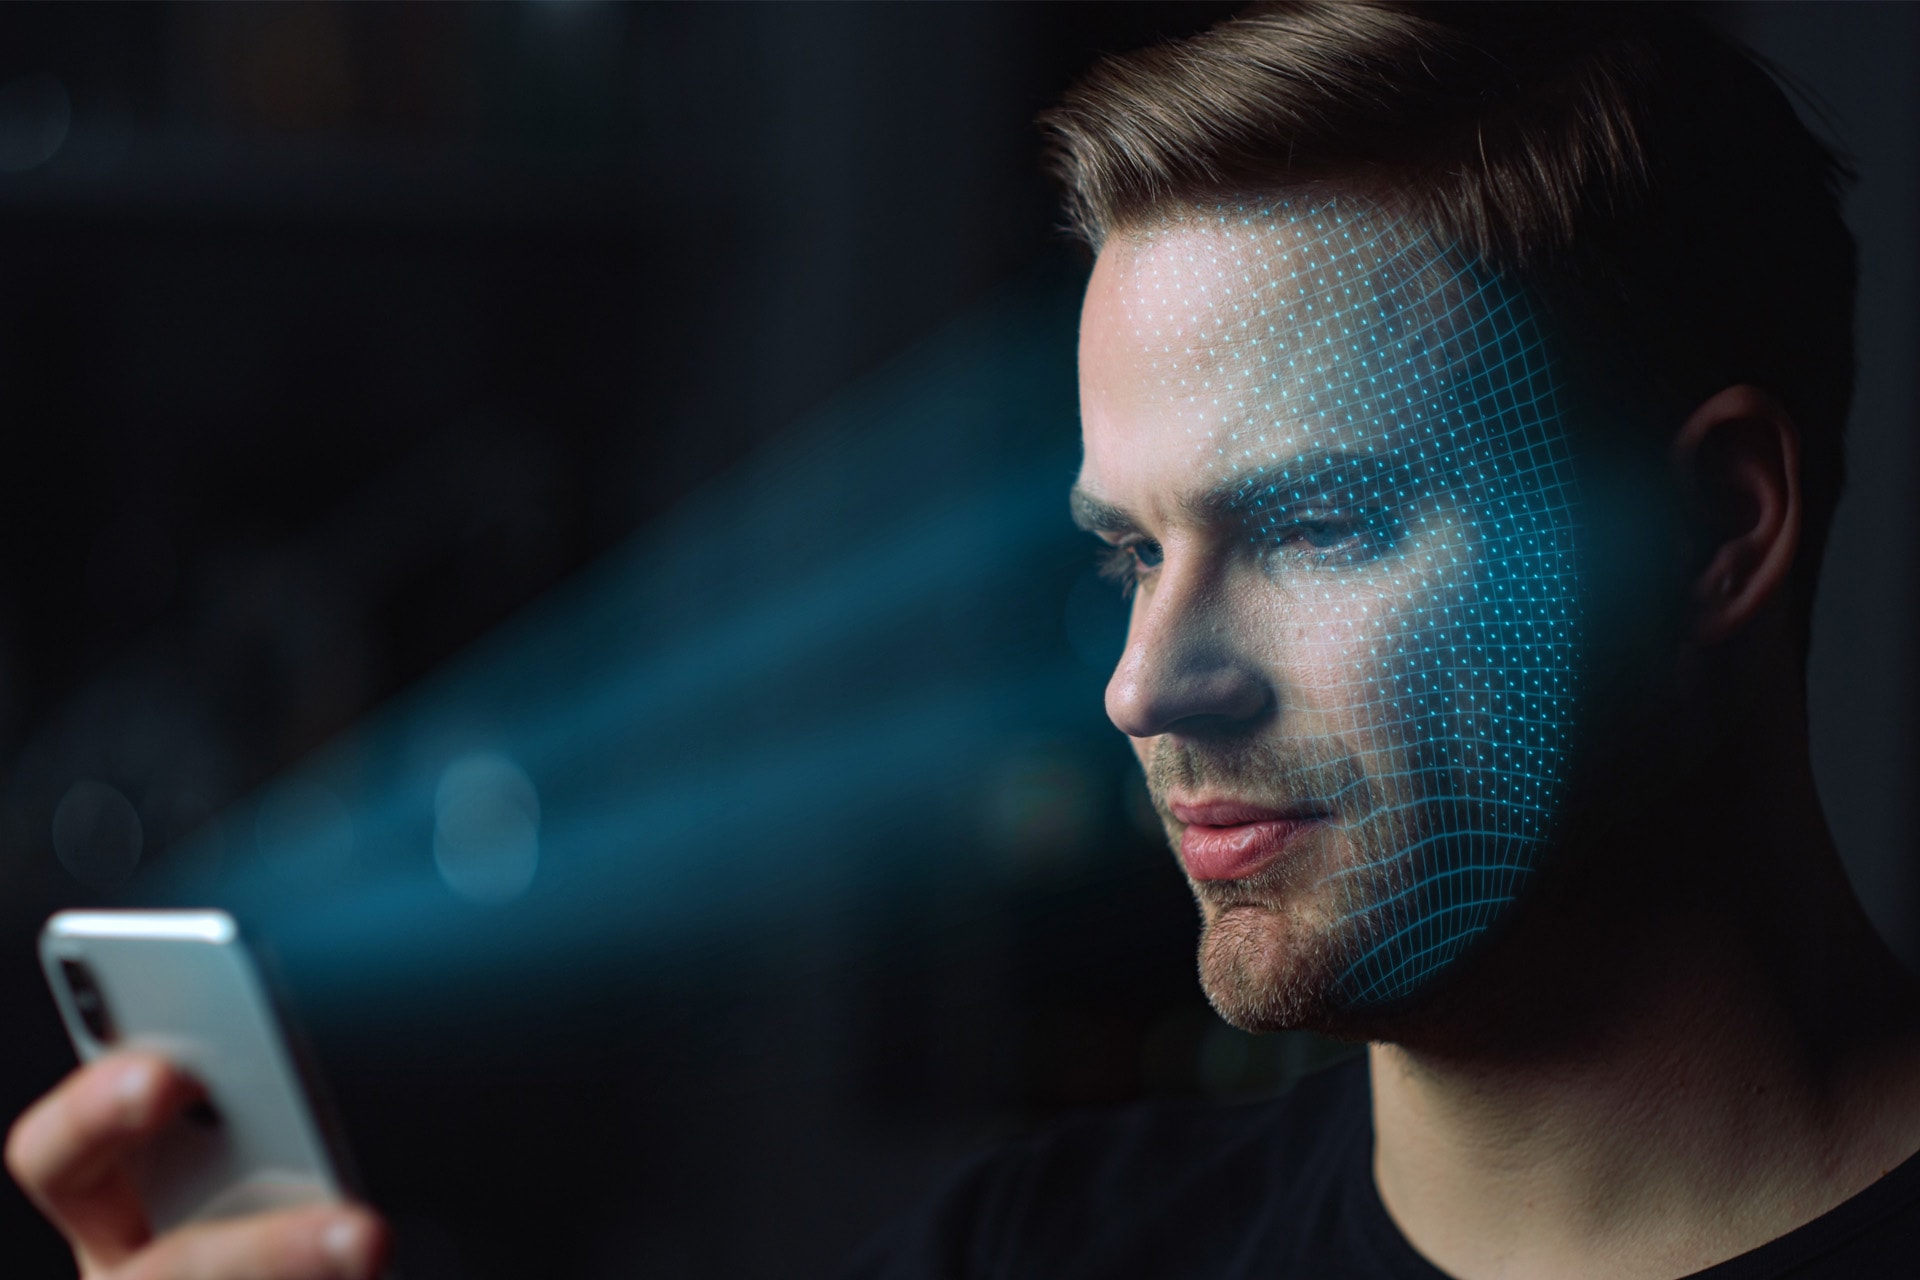 Keeping devices secure with facial recognition